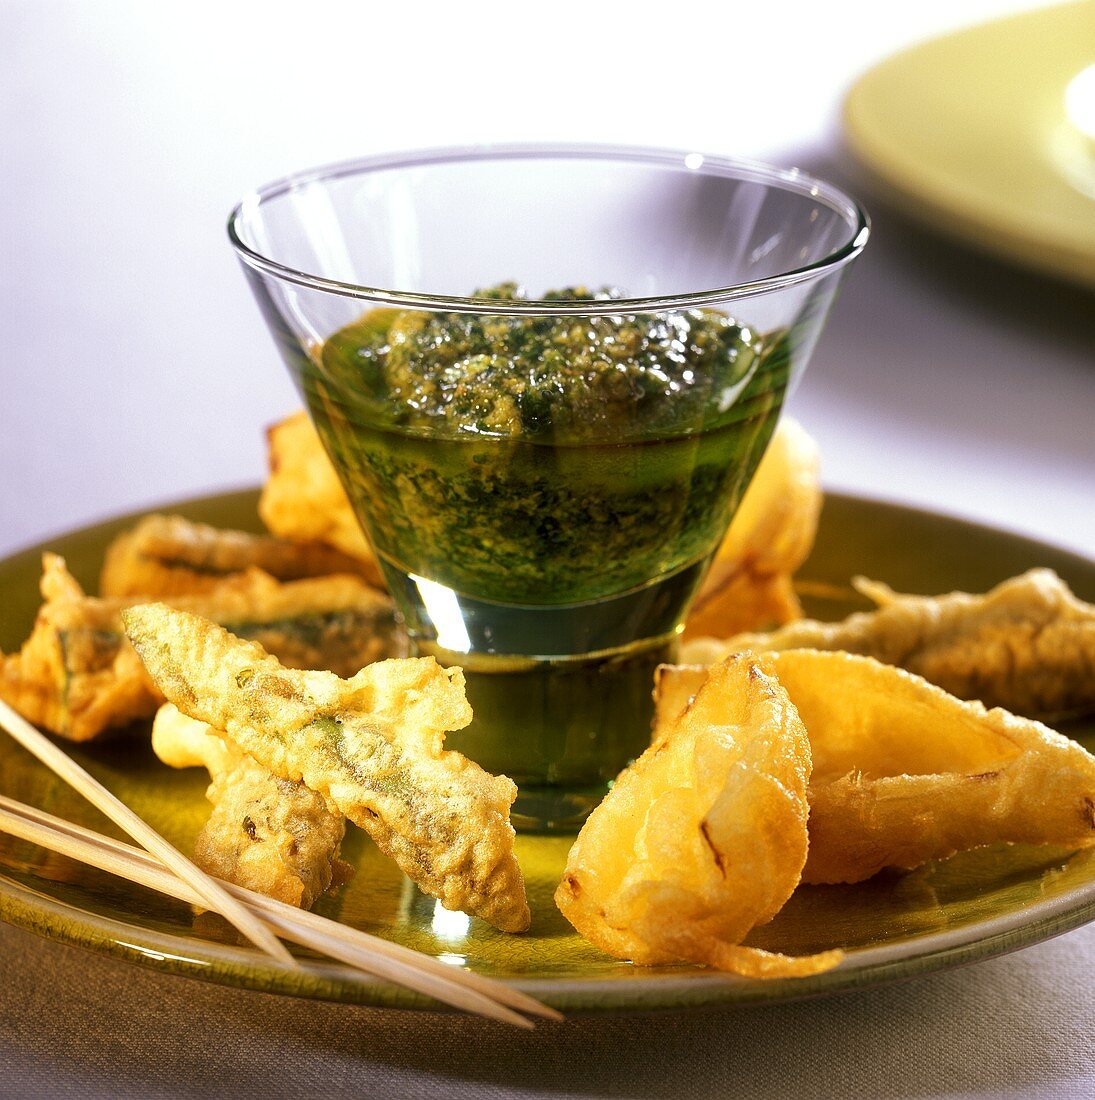 Fritto di verdura (deep-fried vegetables with green sauce)